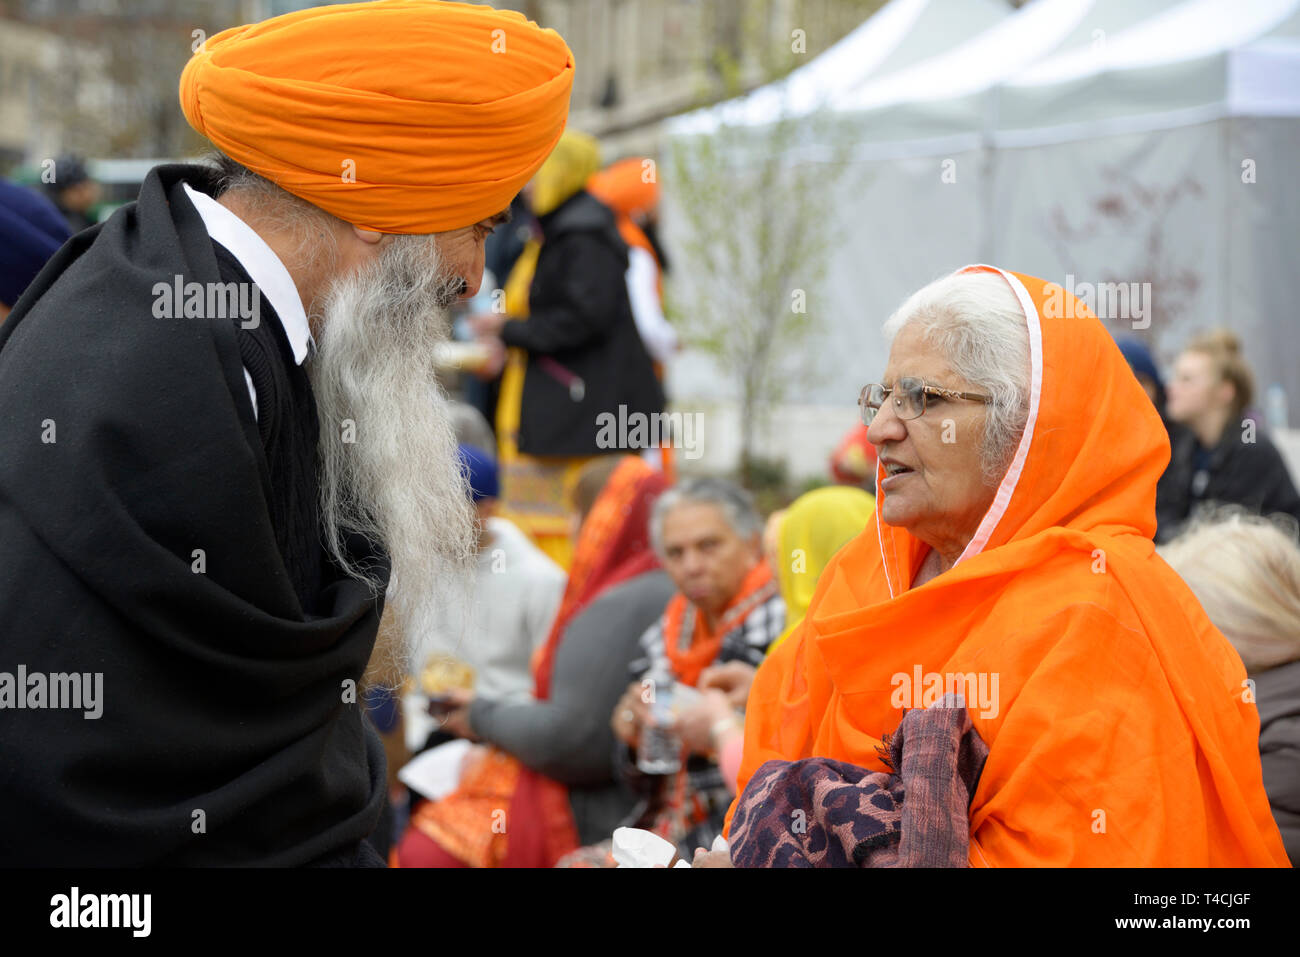 Bearded Sikh man talking to a lady Stock Photo